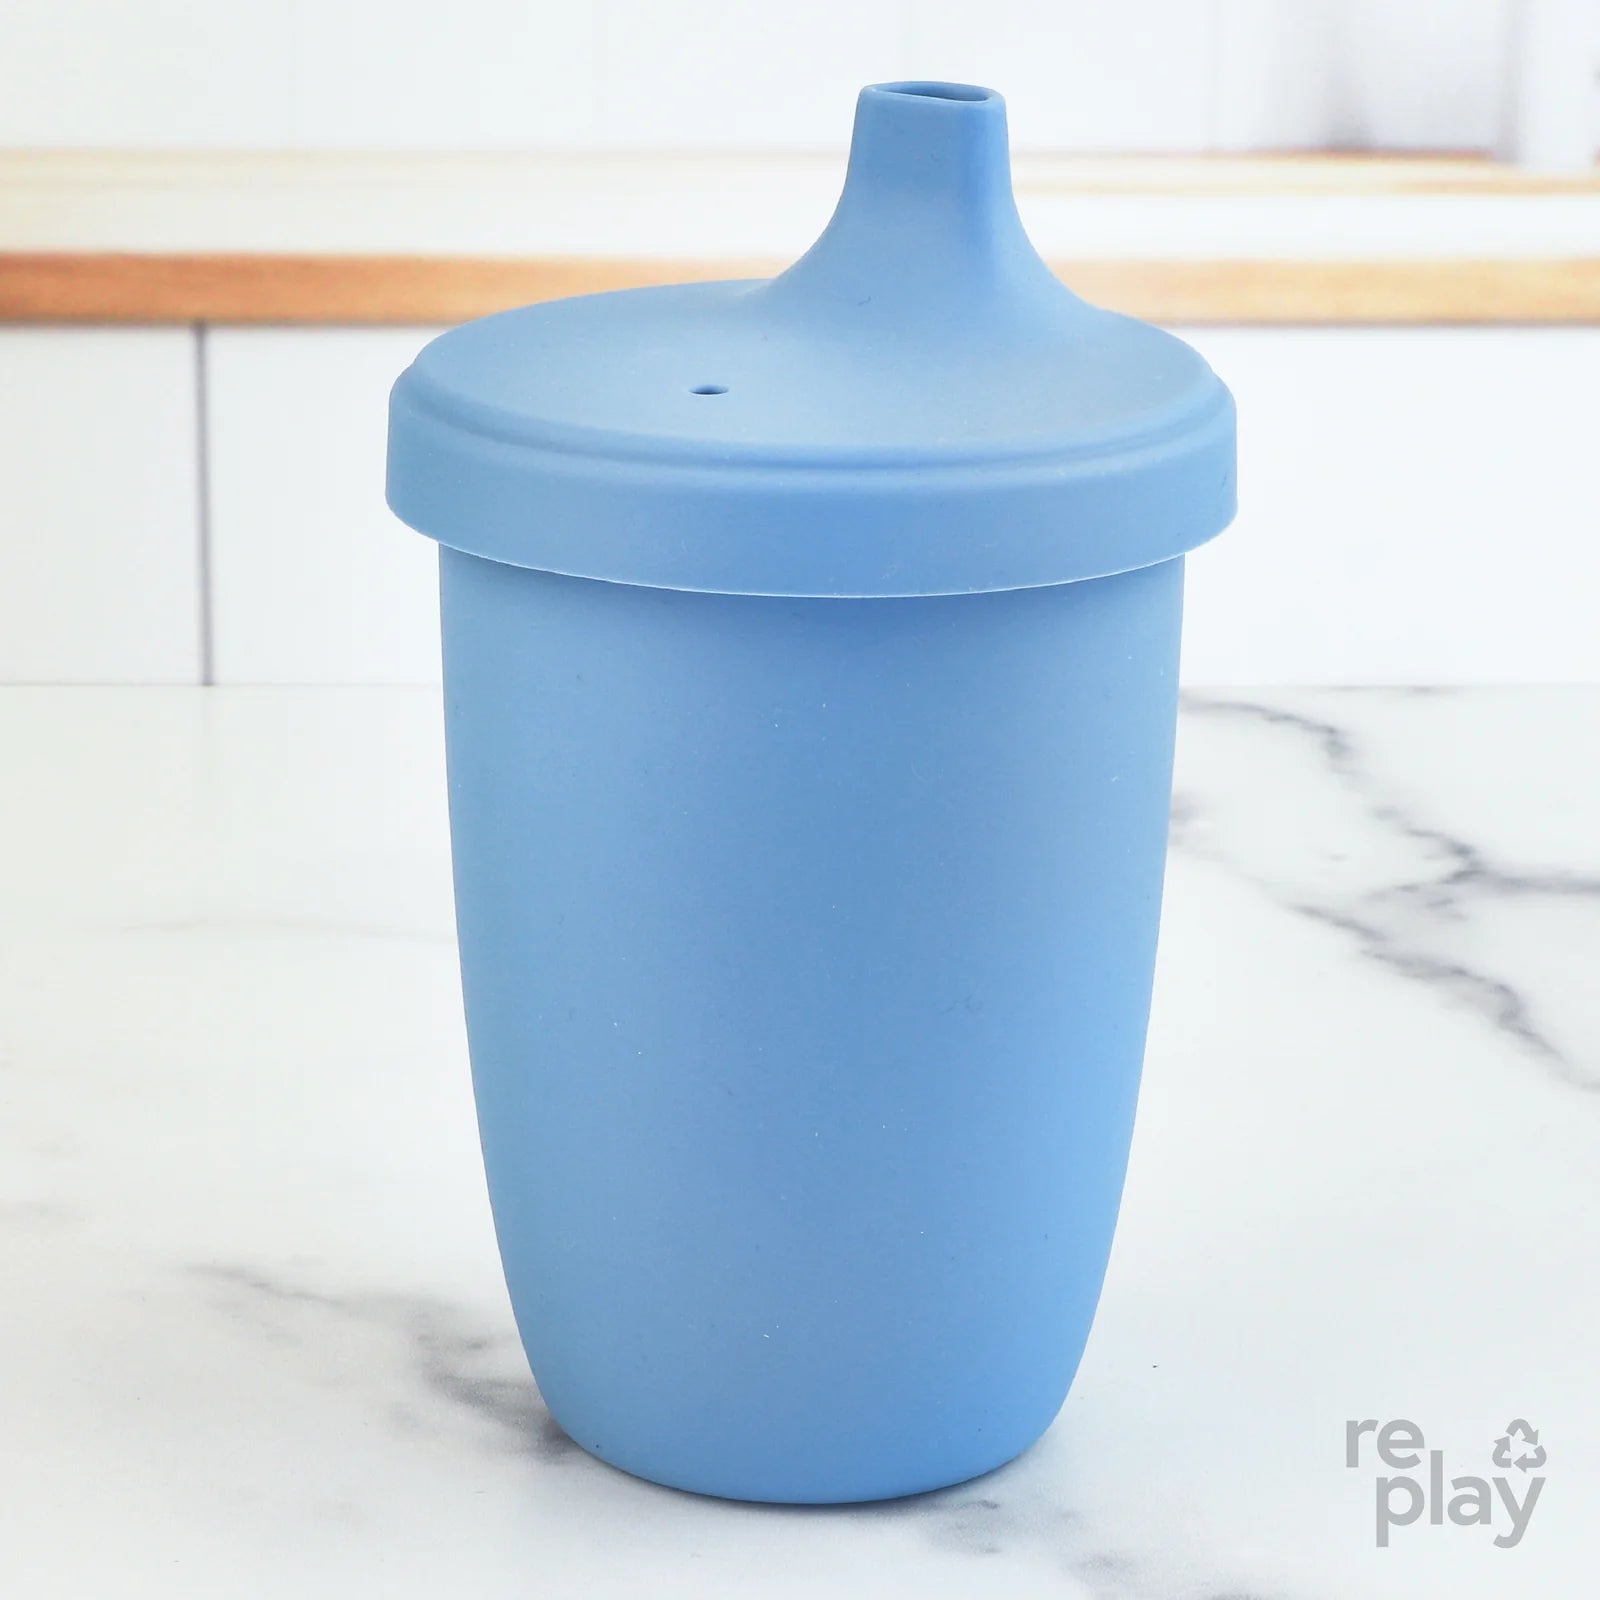 https://cdn.shopify.com/s/files/1/1300/6865/files/Re-Play-8-oz_-Silicone-Sippy-Cup-RE-PLAY-WHOLESALE-2.webp?v=1684287953&width=1600